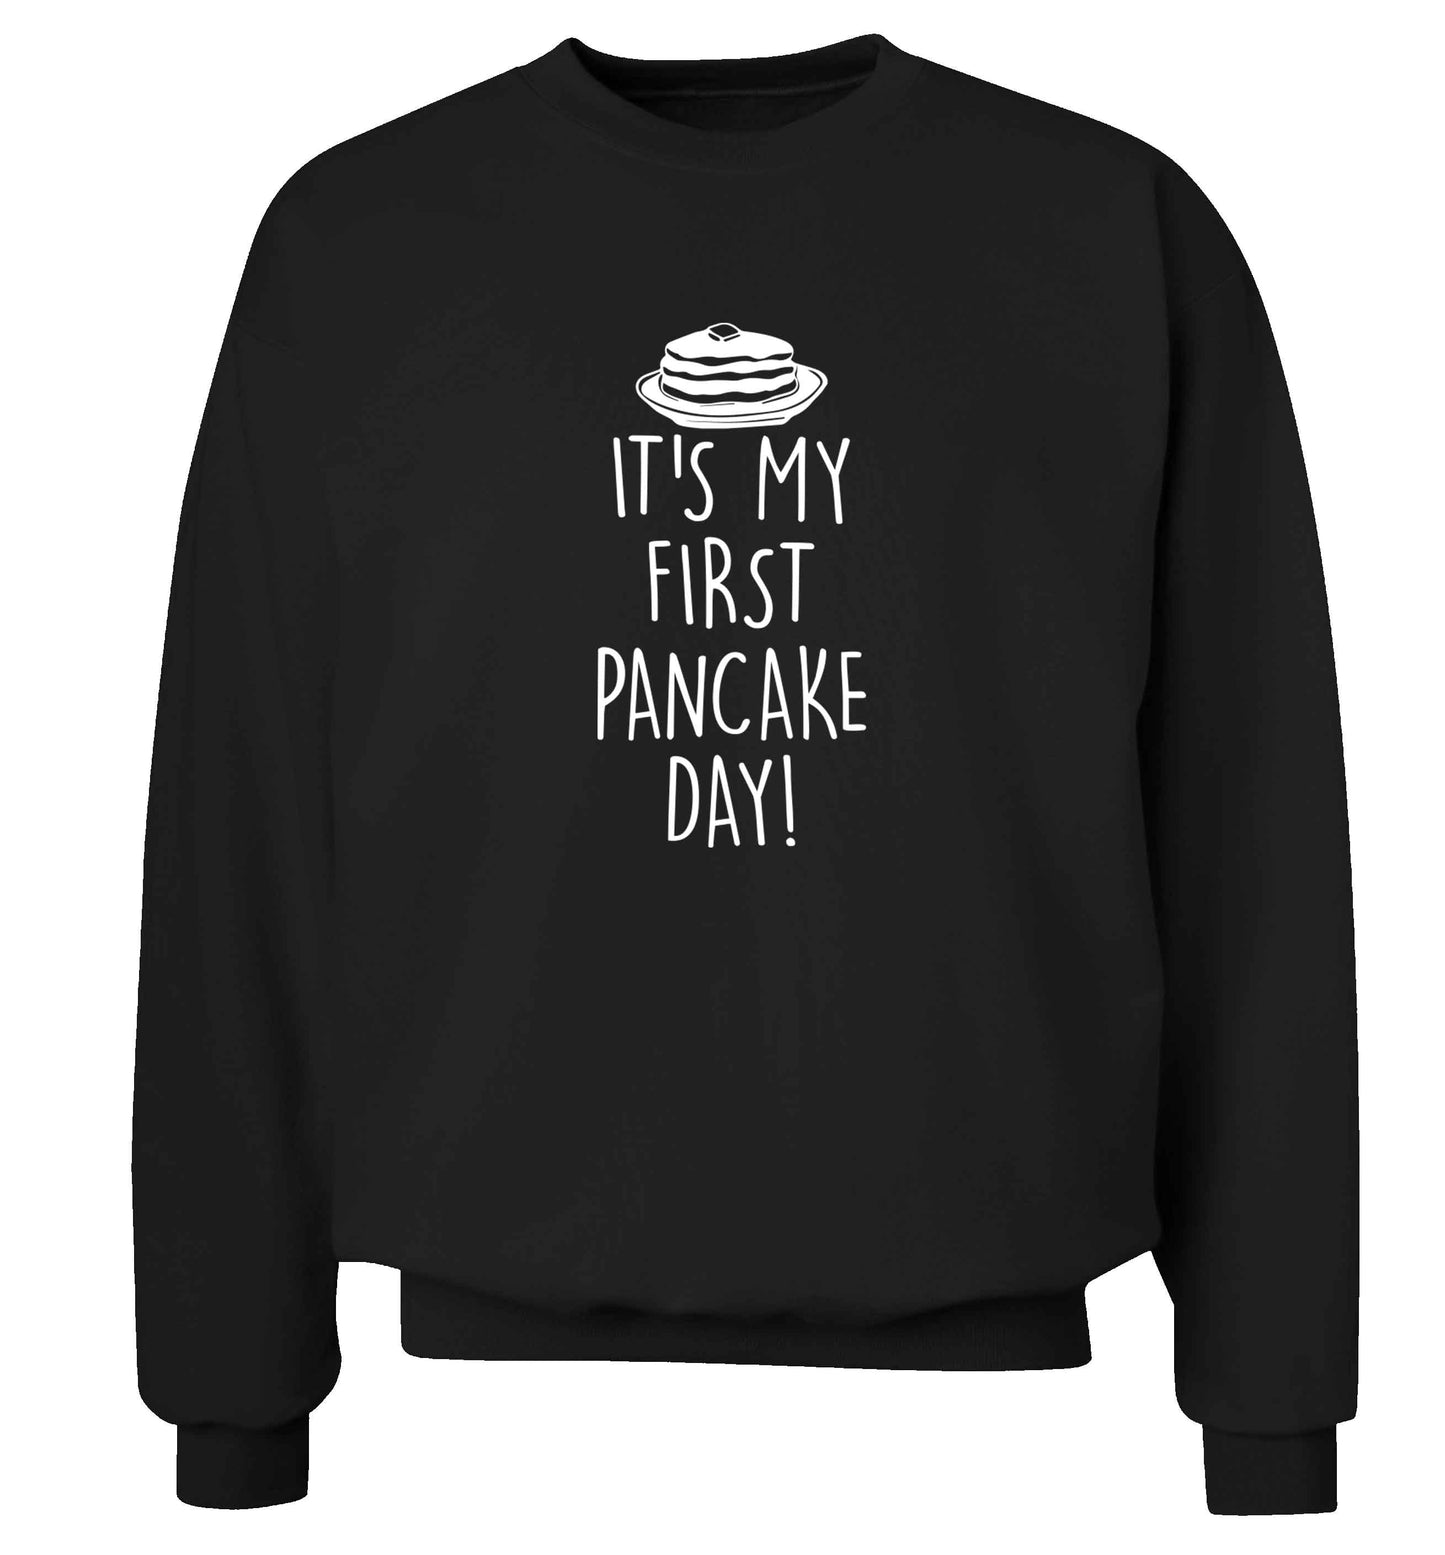 It's my first pancake day adult's unisex black sweater 2XL